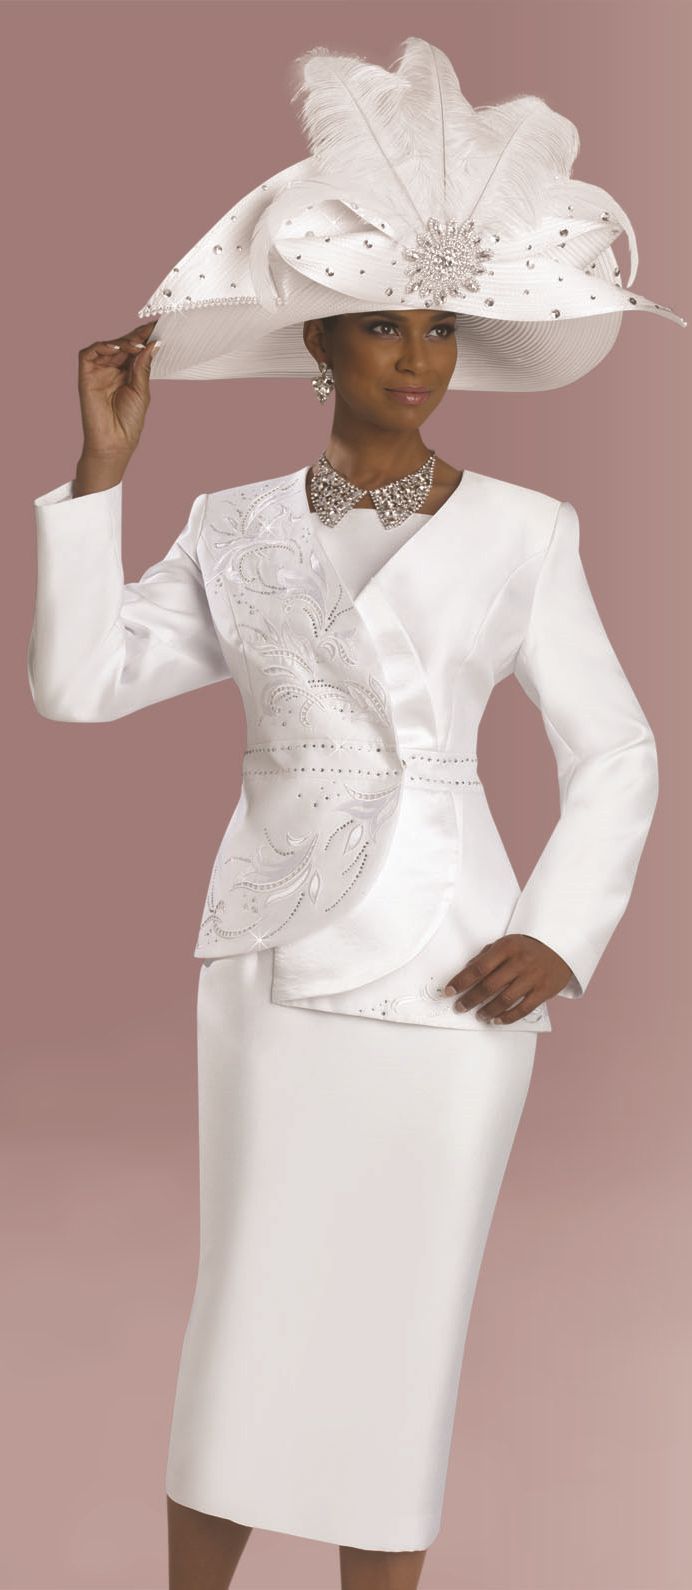 Donna Vinci 5482 Womens White Church Suit - French Novelty